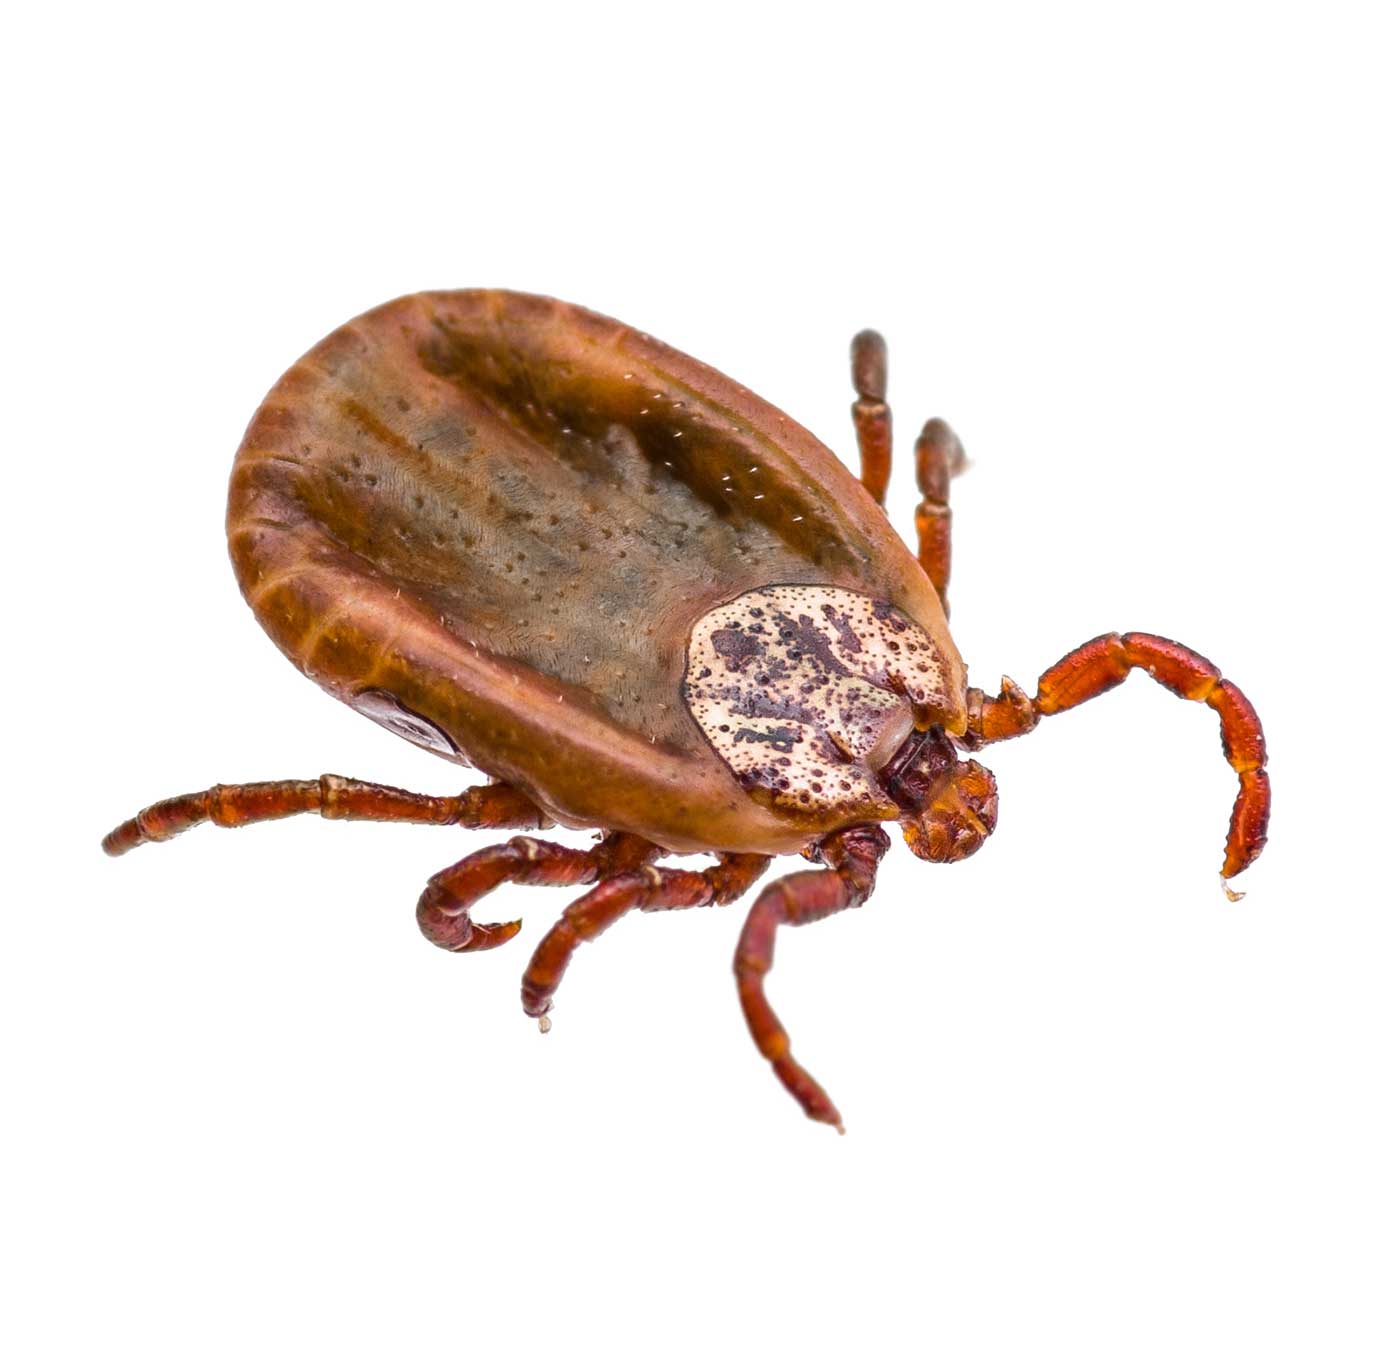 Infected Tick